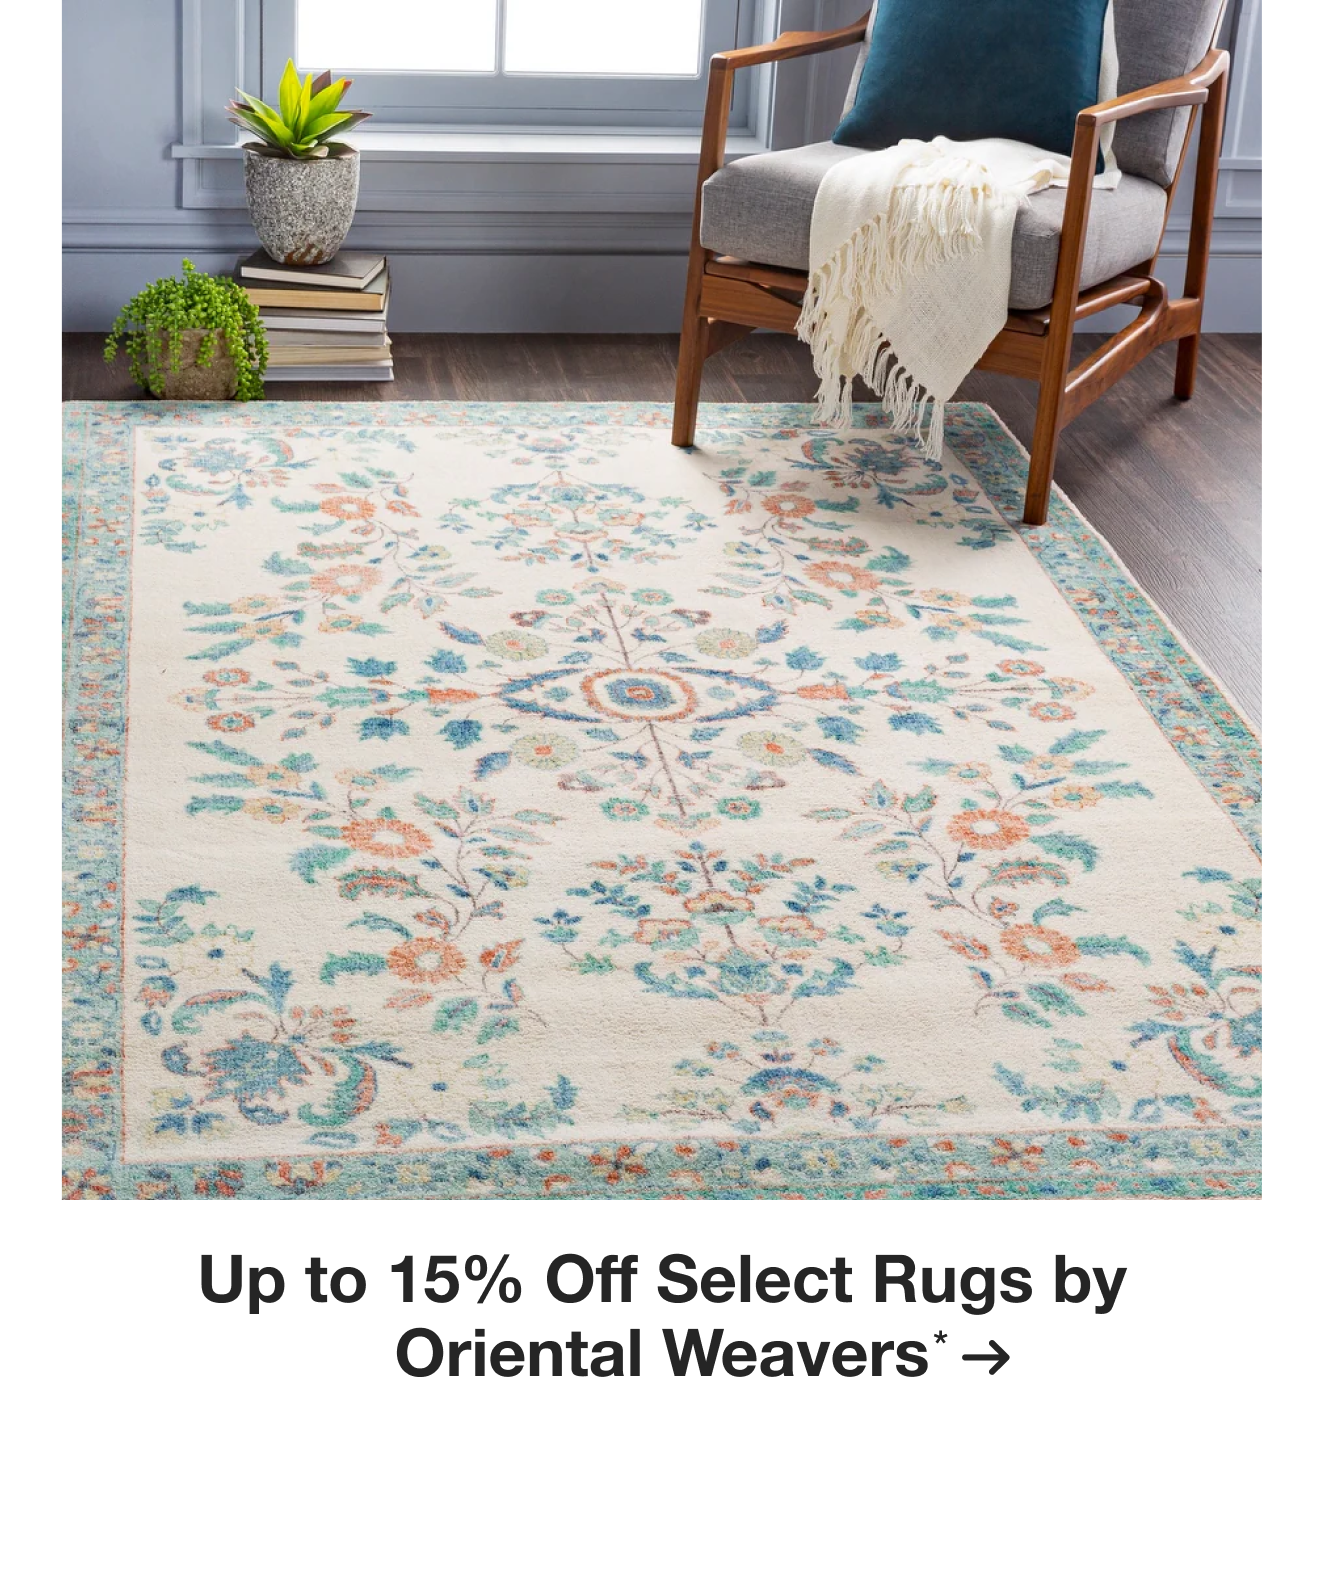 Up to 15% Off Select Rugs by Oriental Weavers*